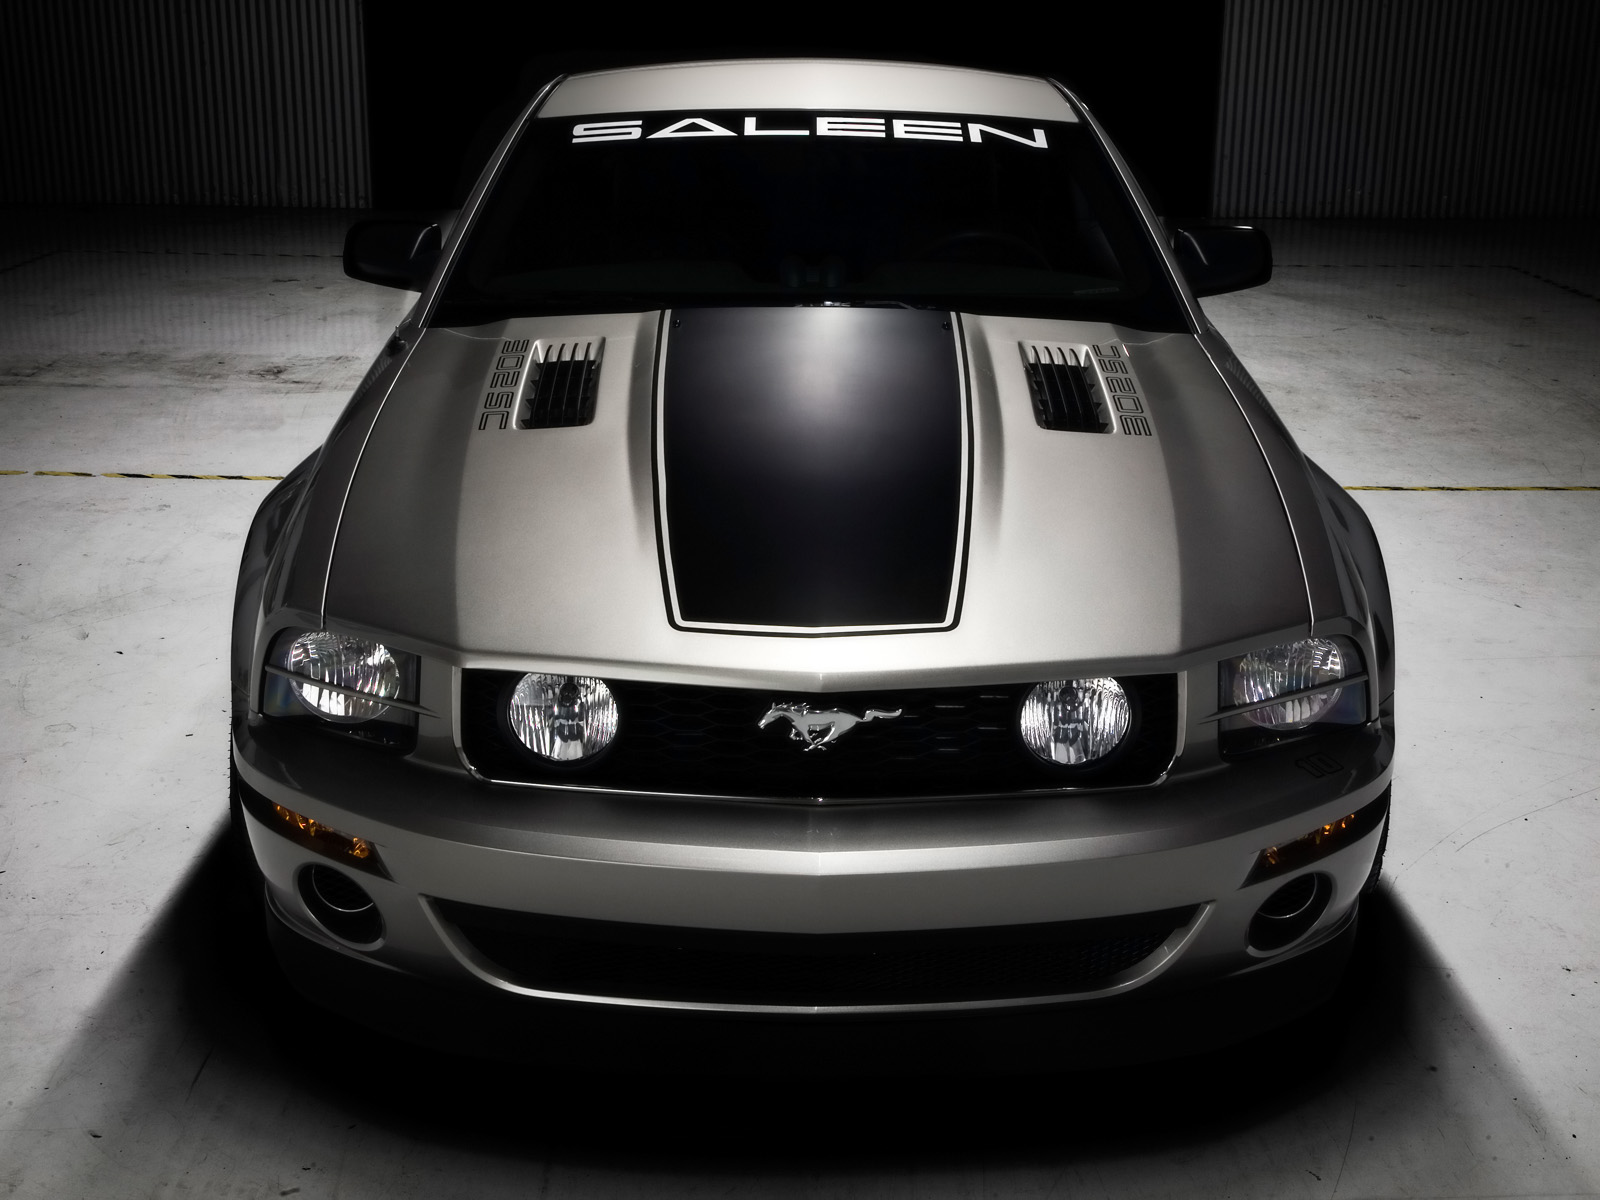 2008, Saleen, H302sc, Ford, Mustang, Muscle, Supercar, Supercars Wallpaper